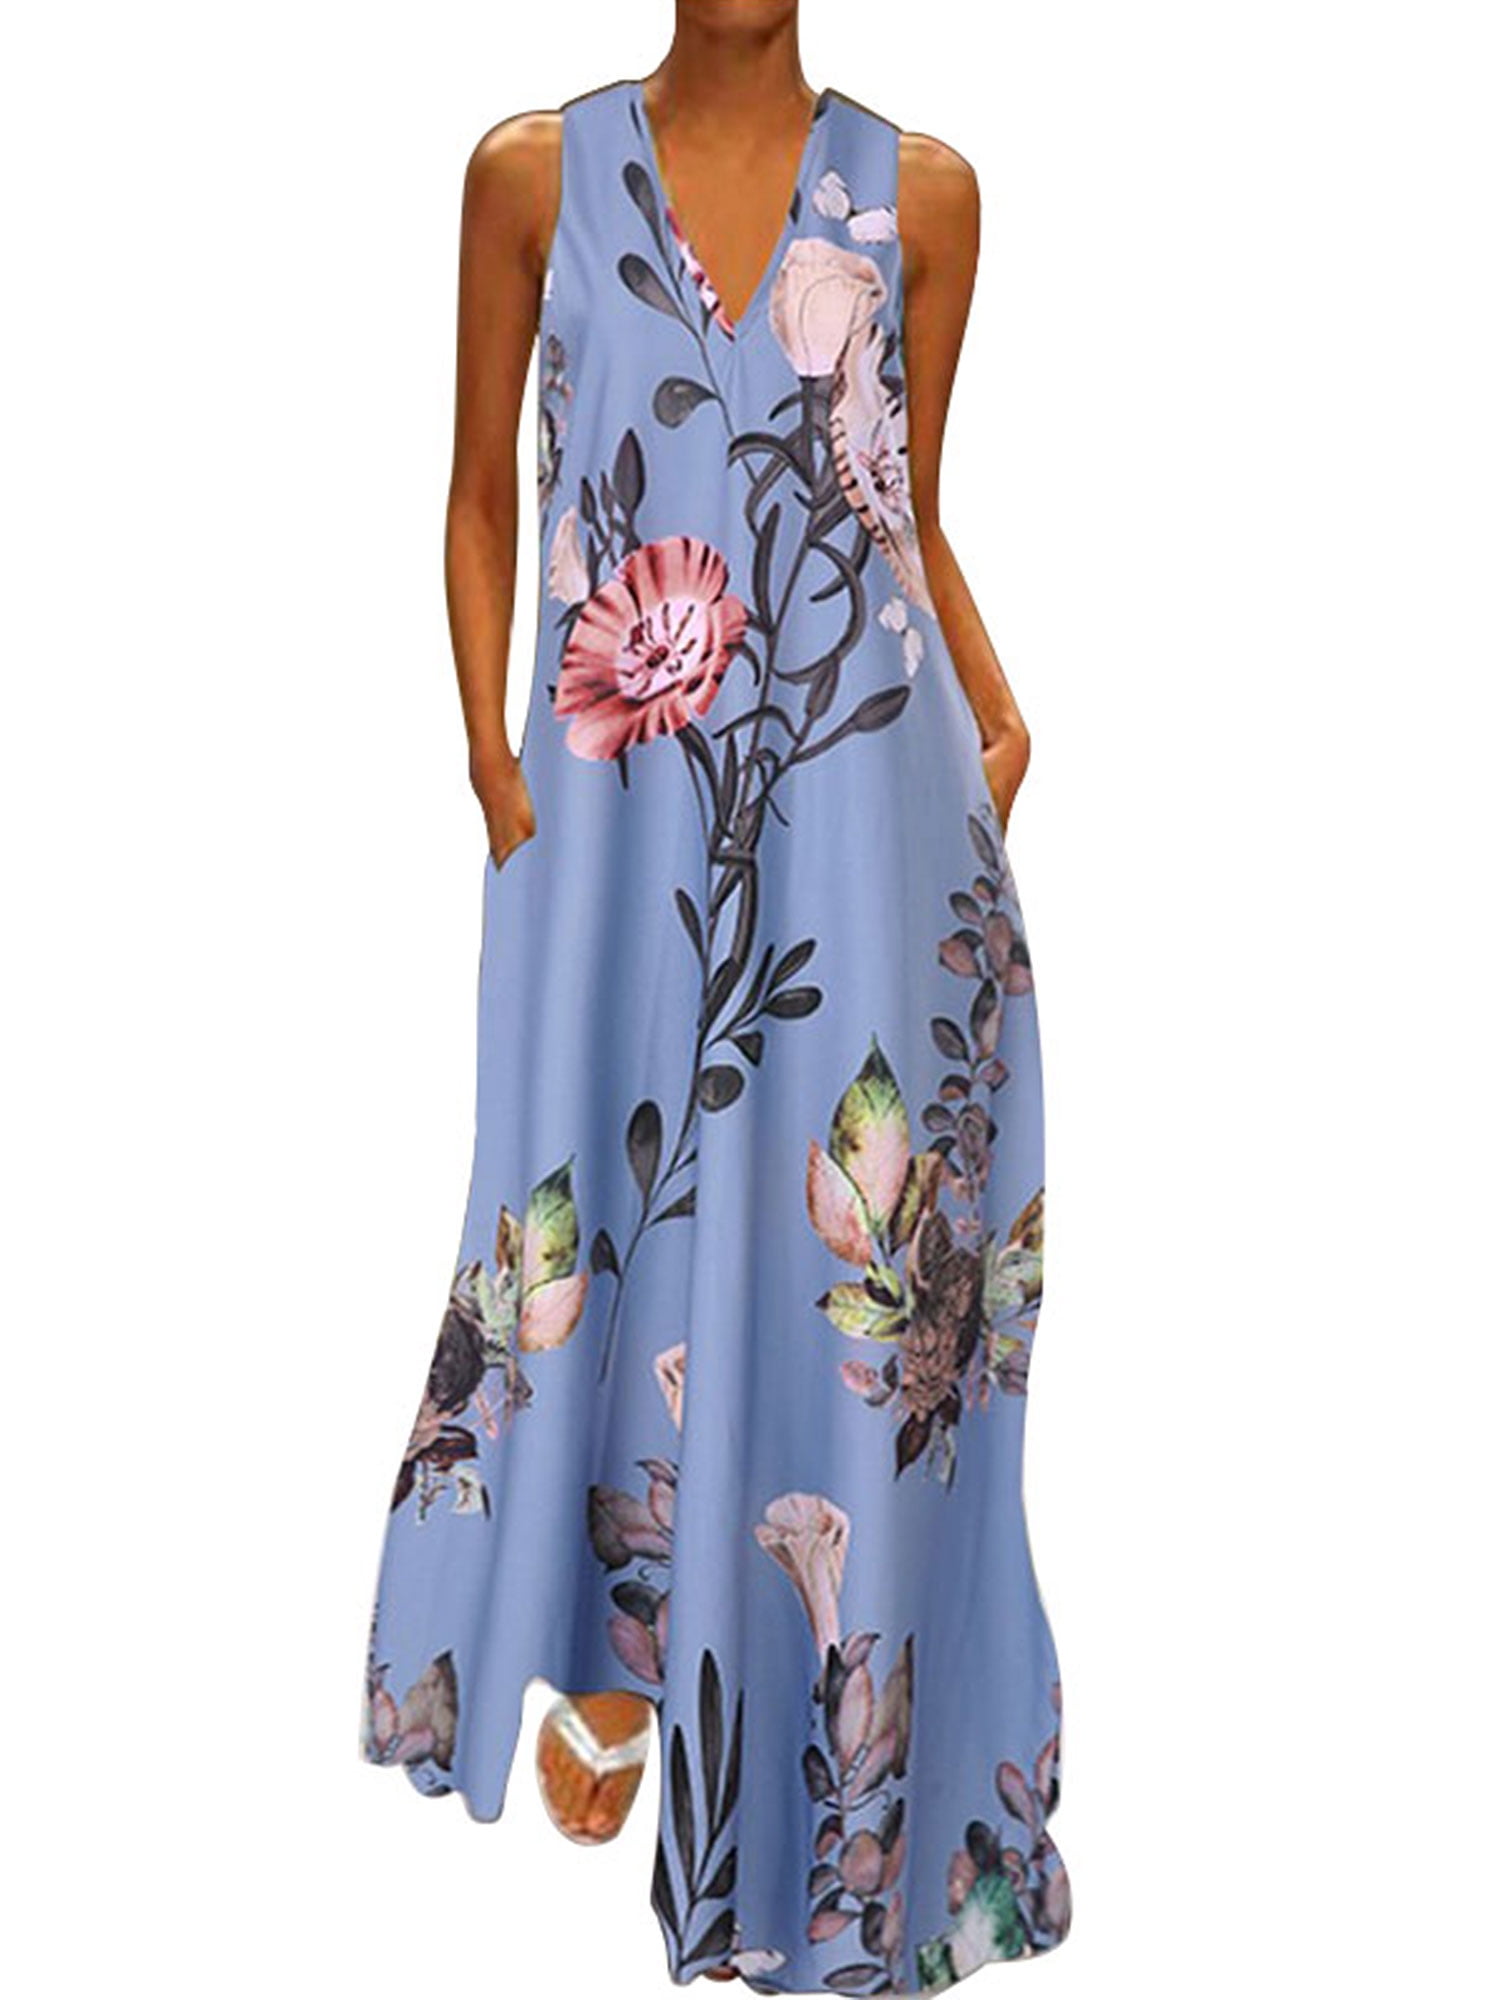 Dresses Casual women's summer Long Sleeveless Cocktail Floral Maxi beach Party